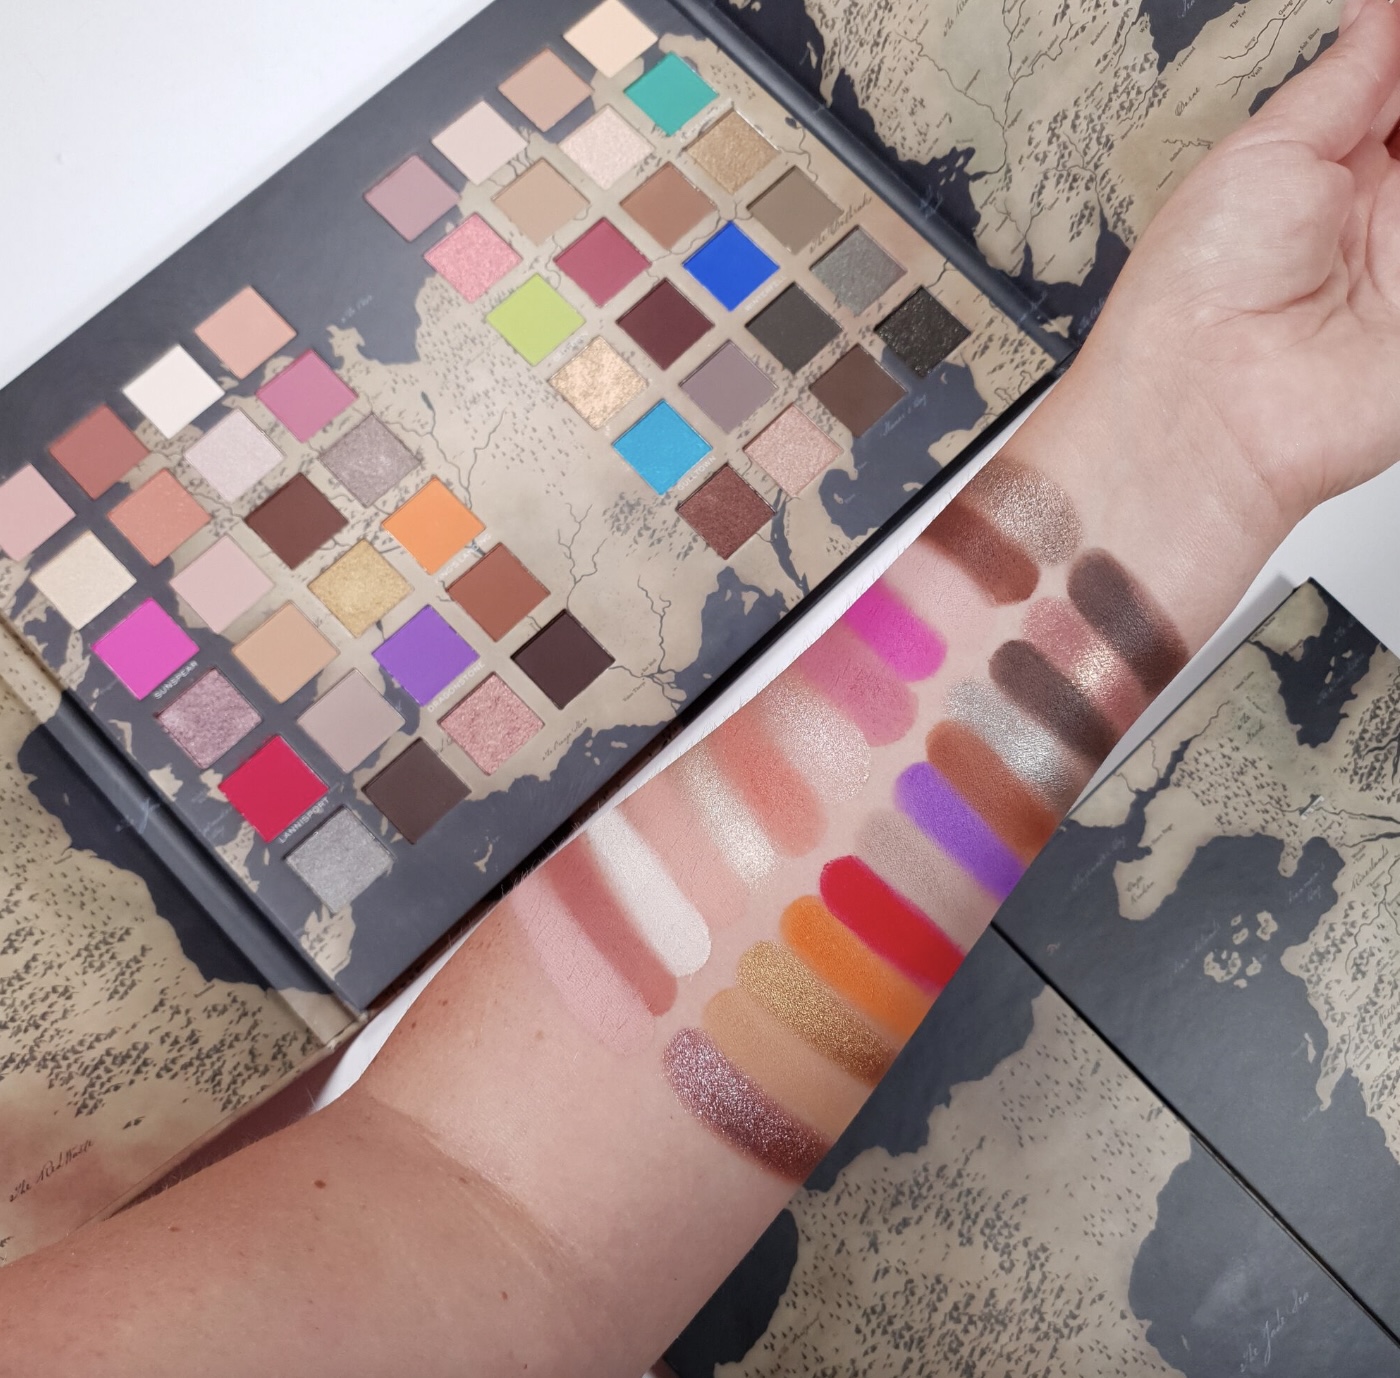 Revolution X Game of Thrones Westeros Map Shadow Palette